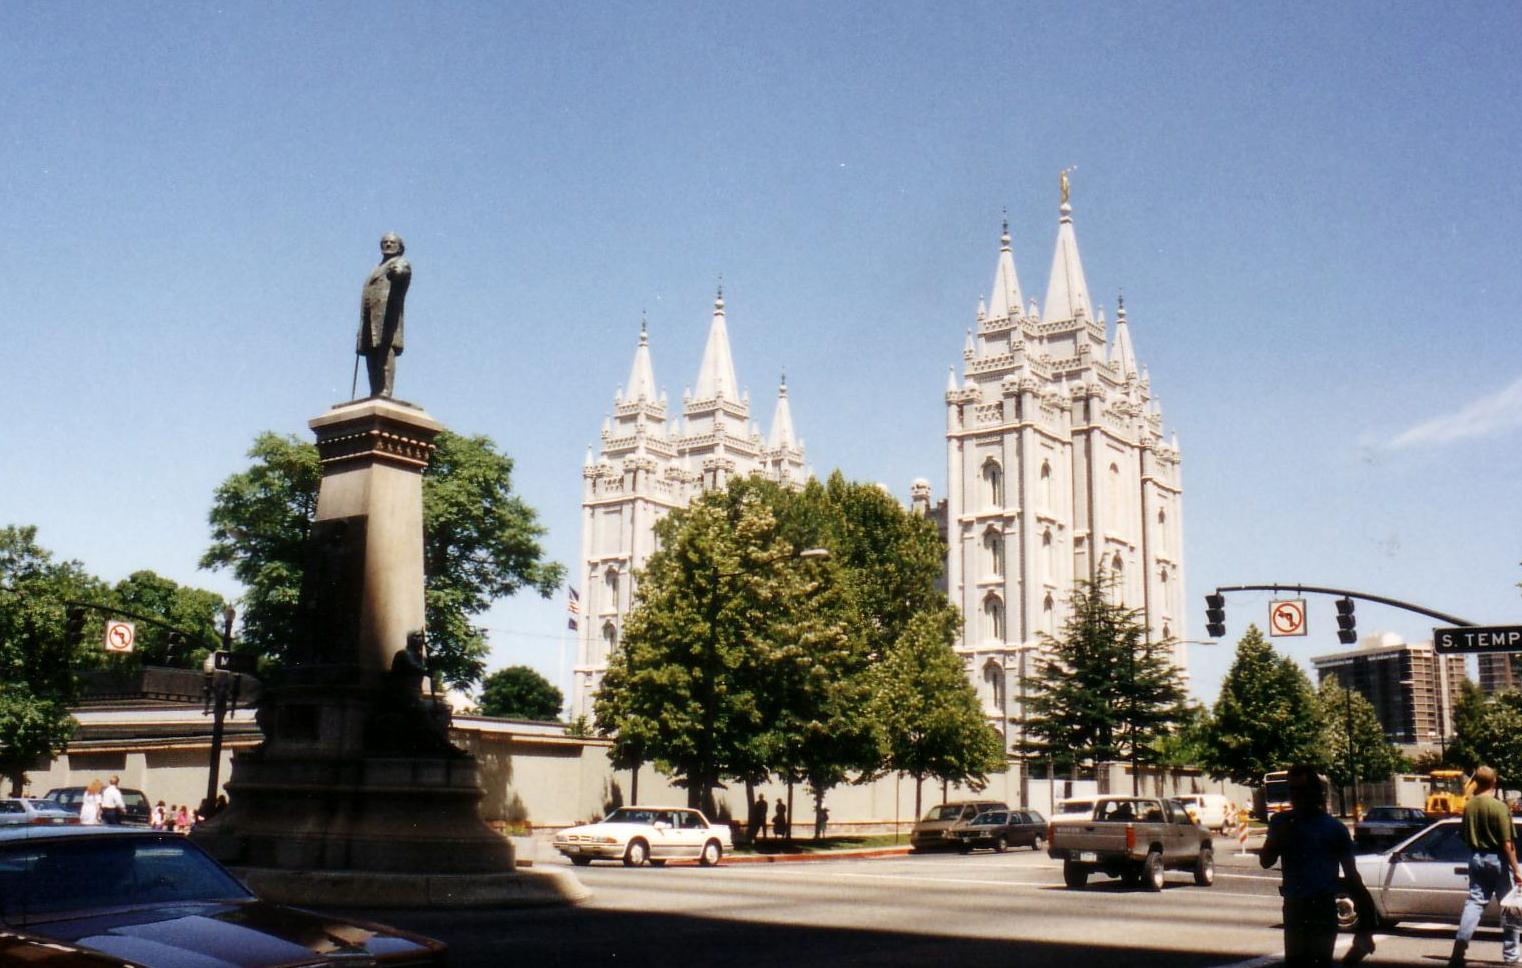 Salt Lake City Temple and Brigham Young